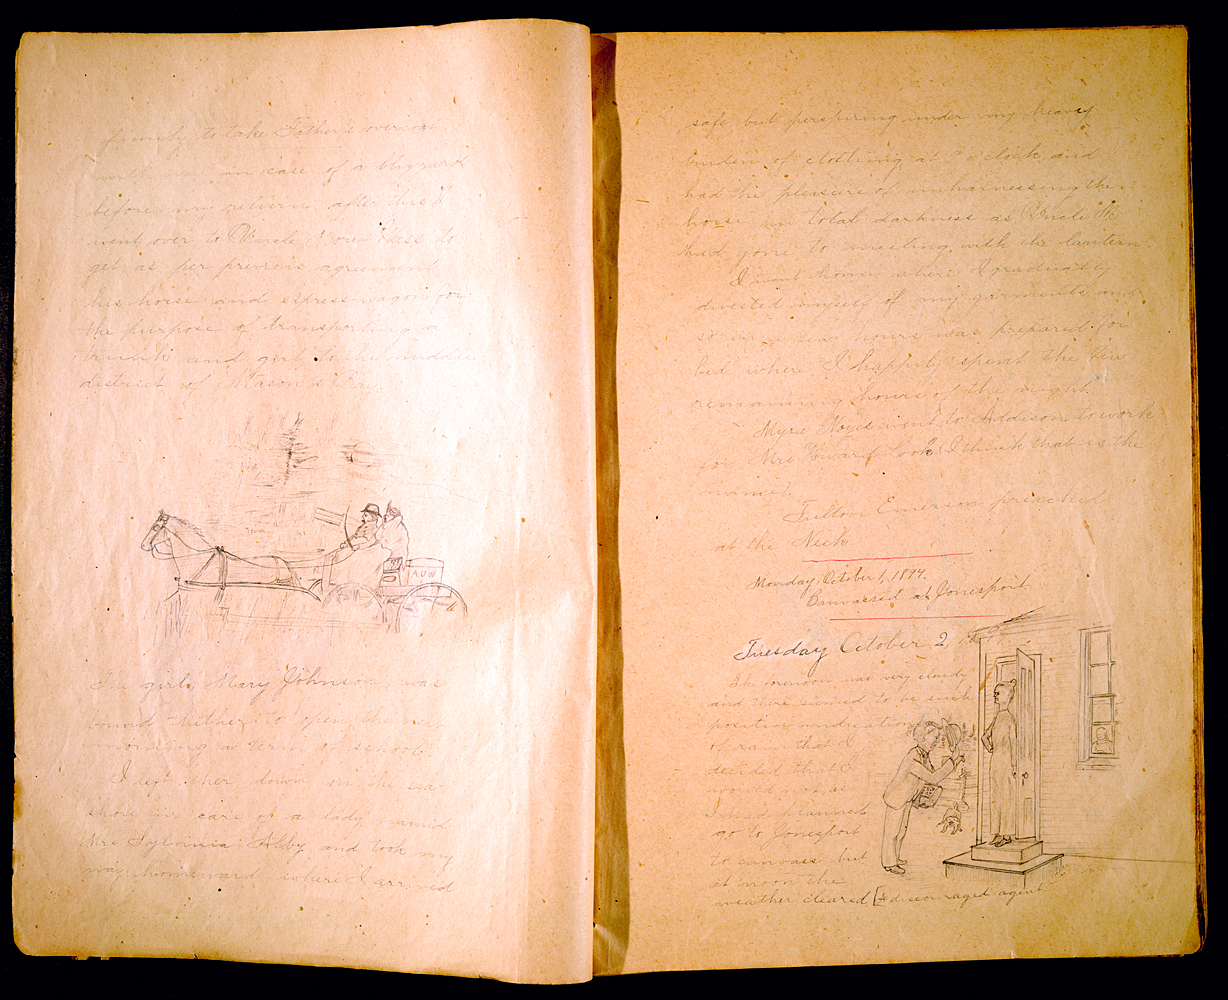 Frank L. Kelley's Book Canvassing Diary Interior with Illustrations of a carriage & salesman at a woman's door